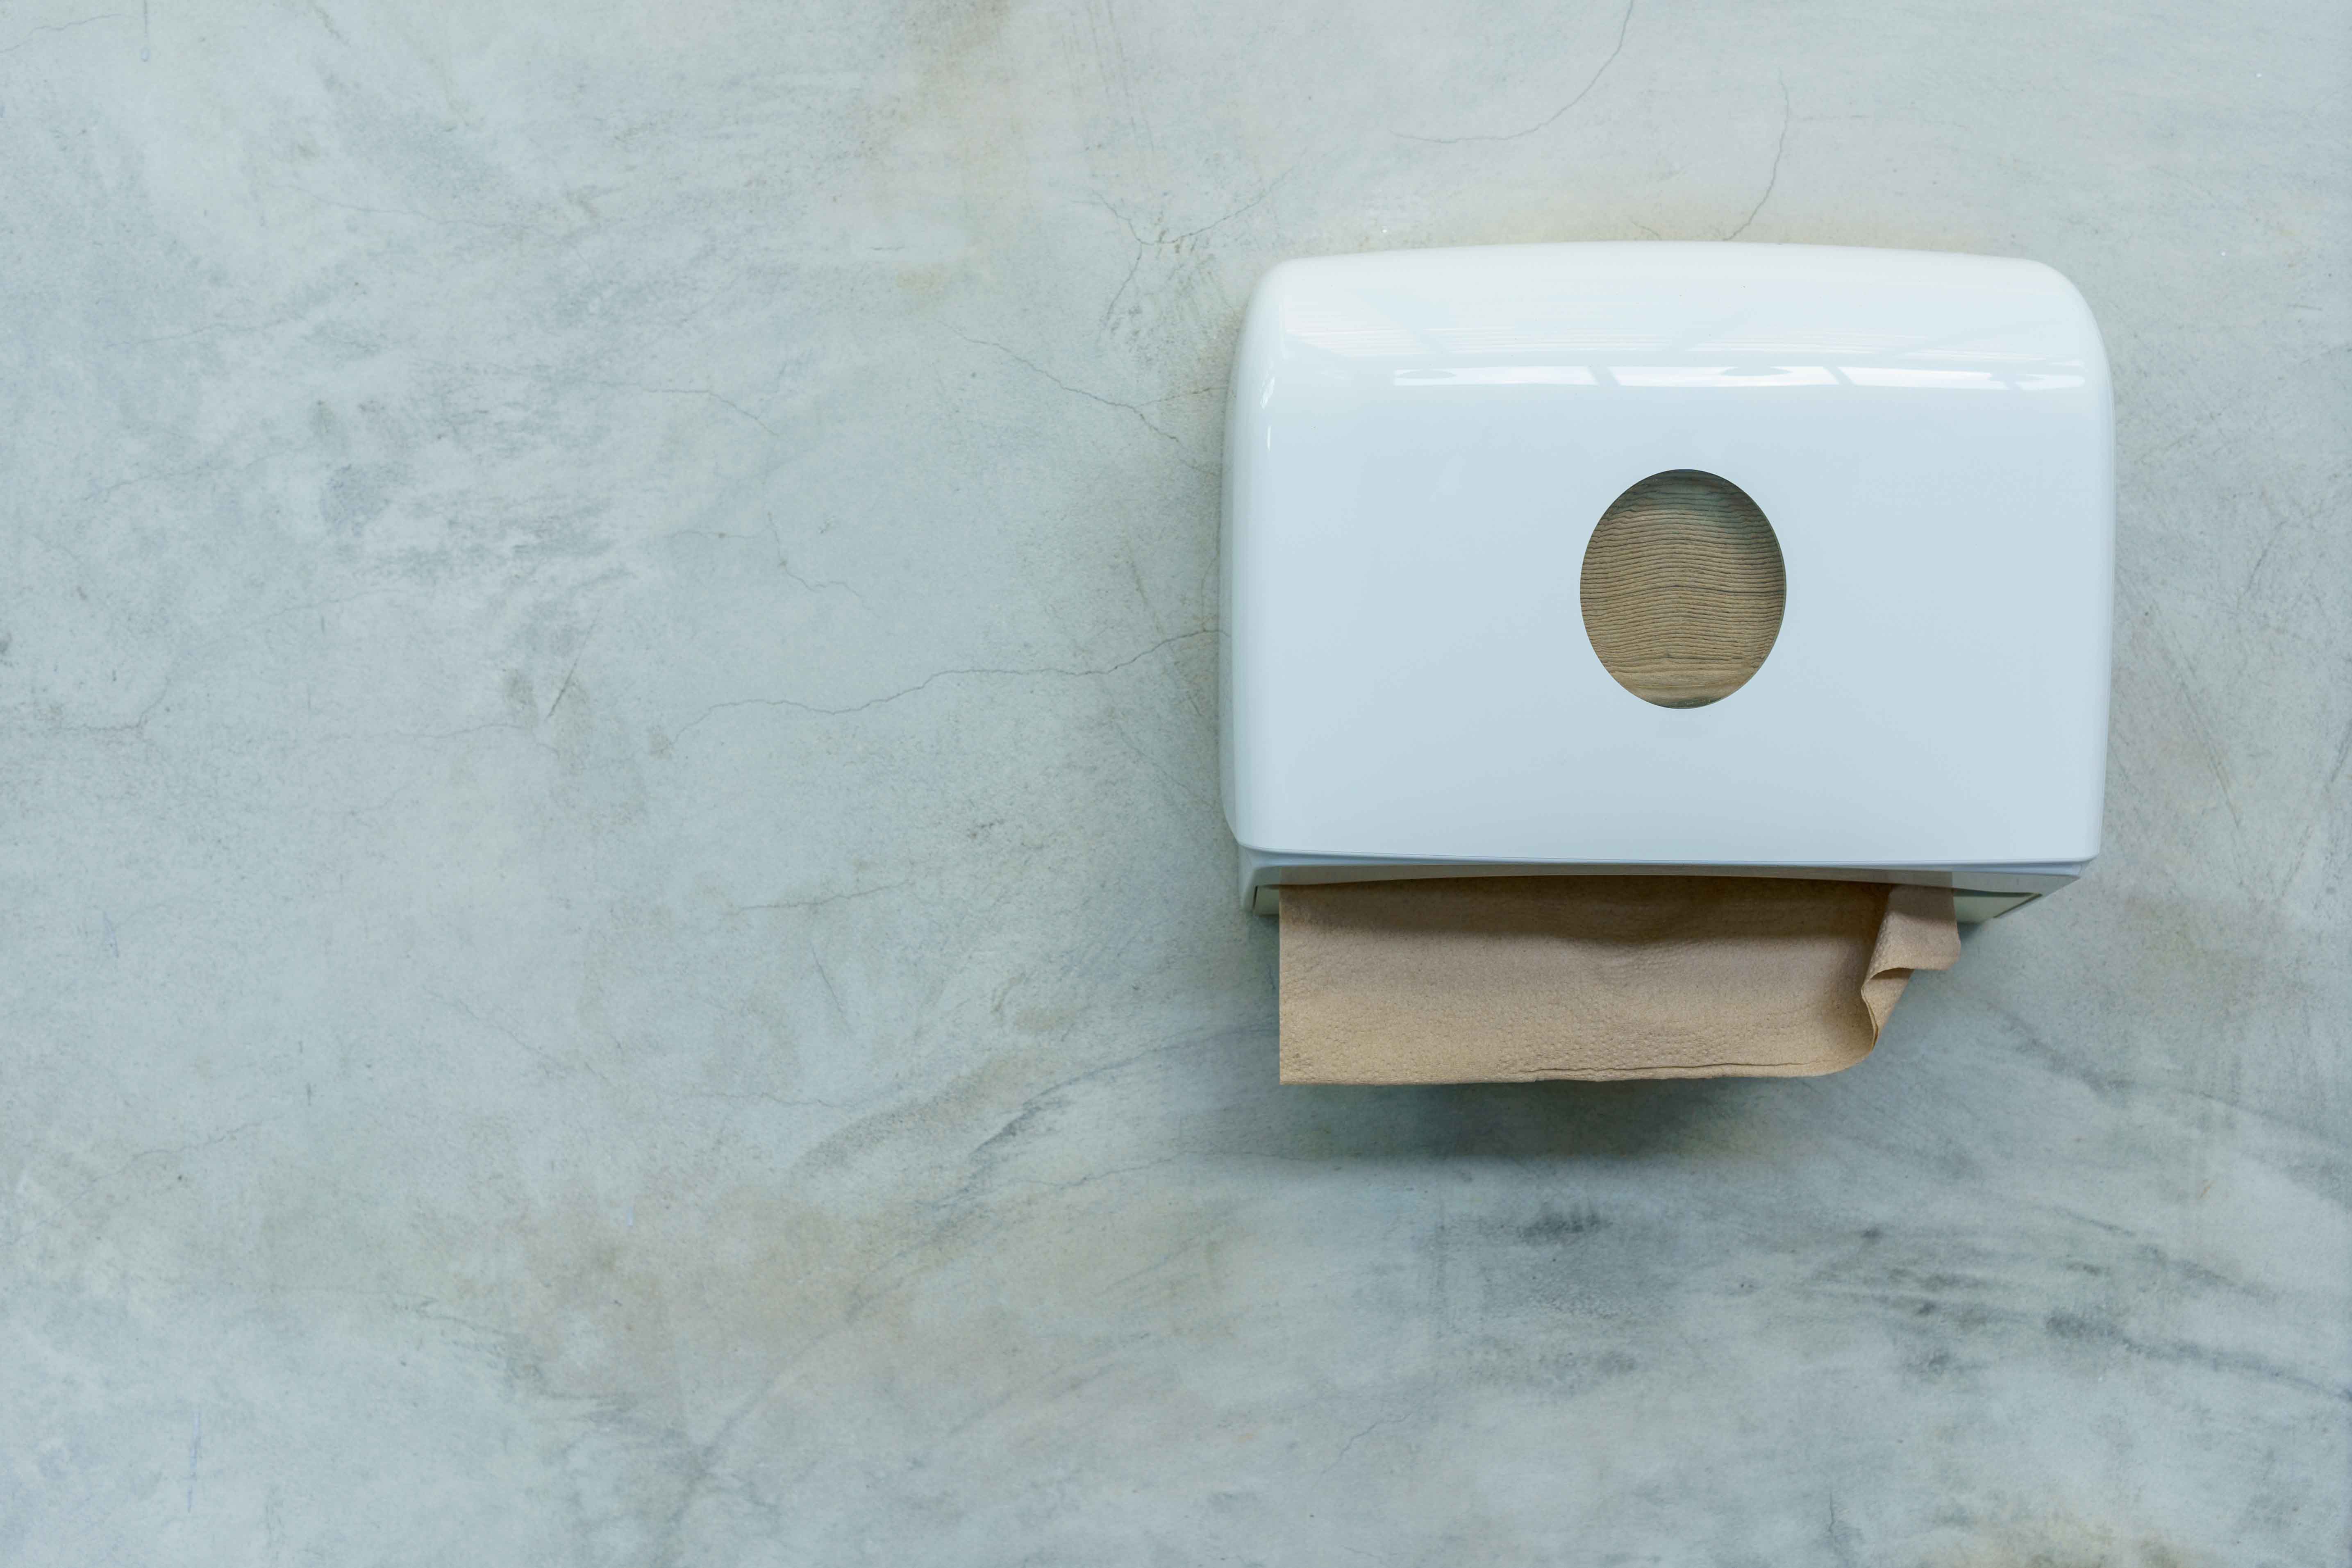 Why hand drying is vital to hand hygiene